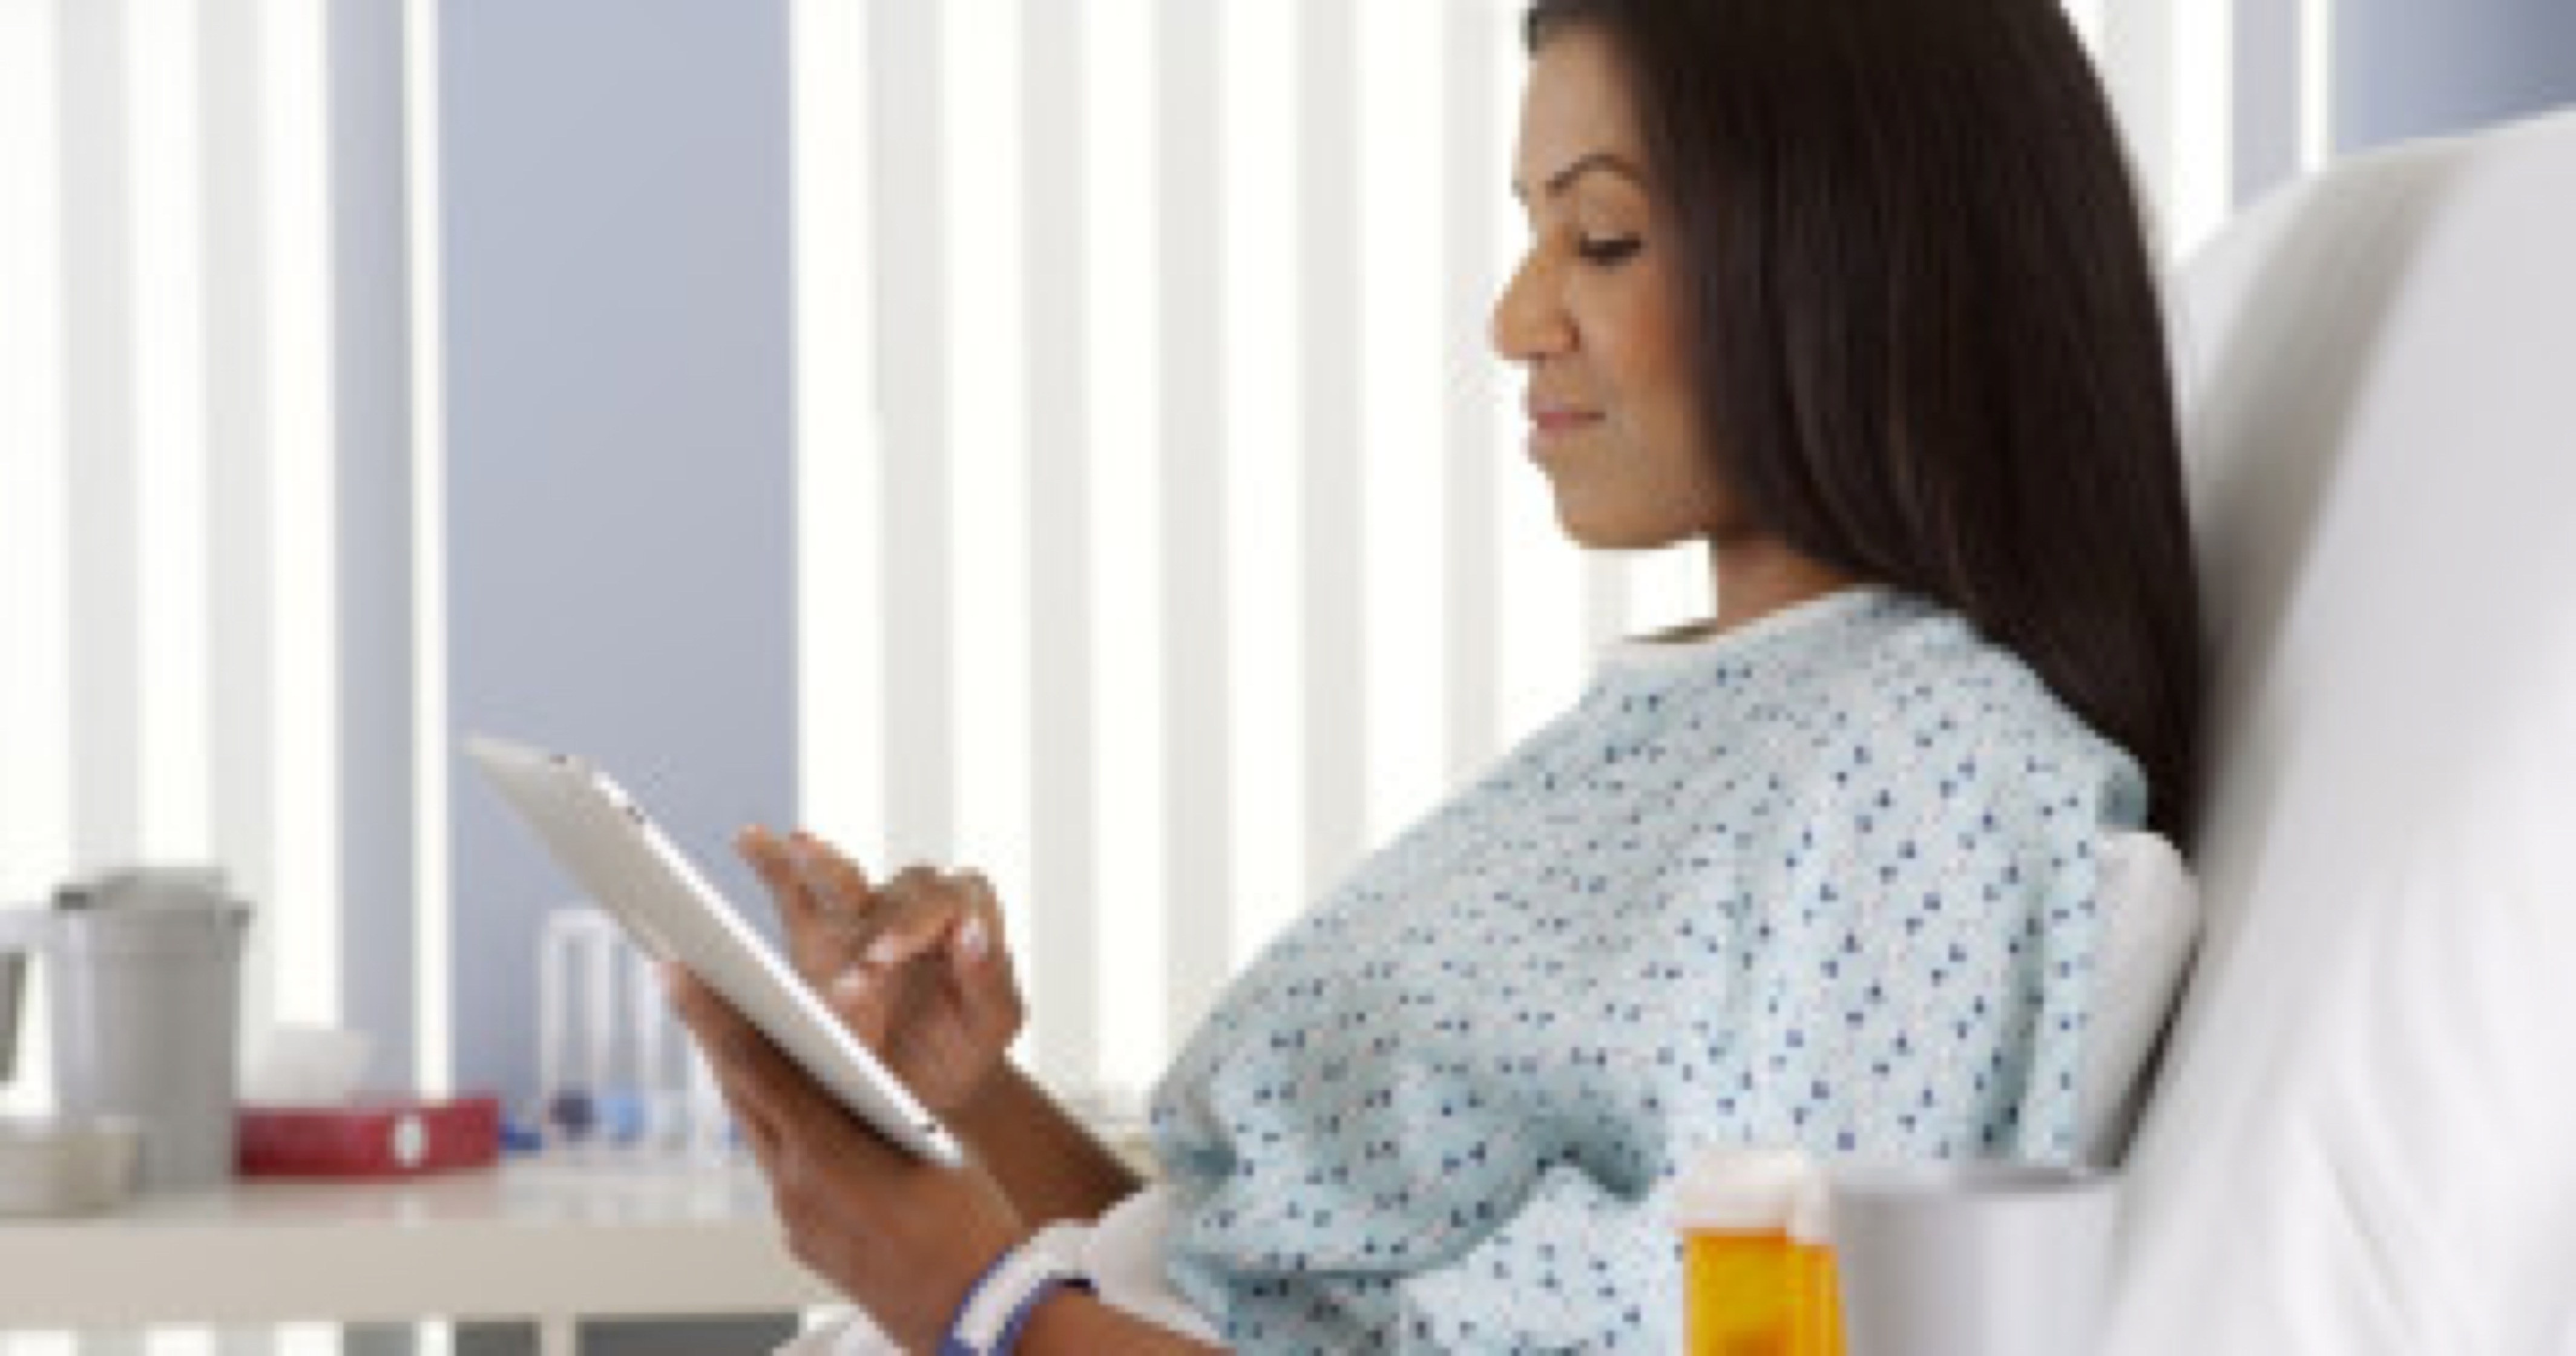 African American woman using tablet computer in hospital bed